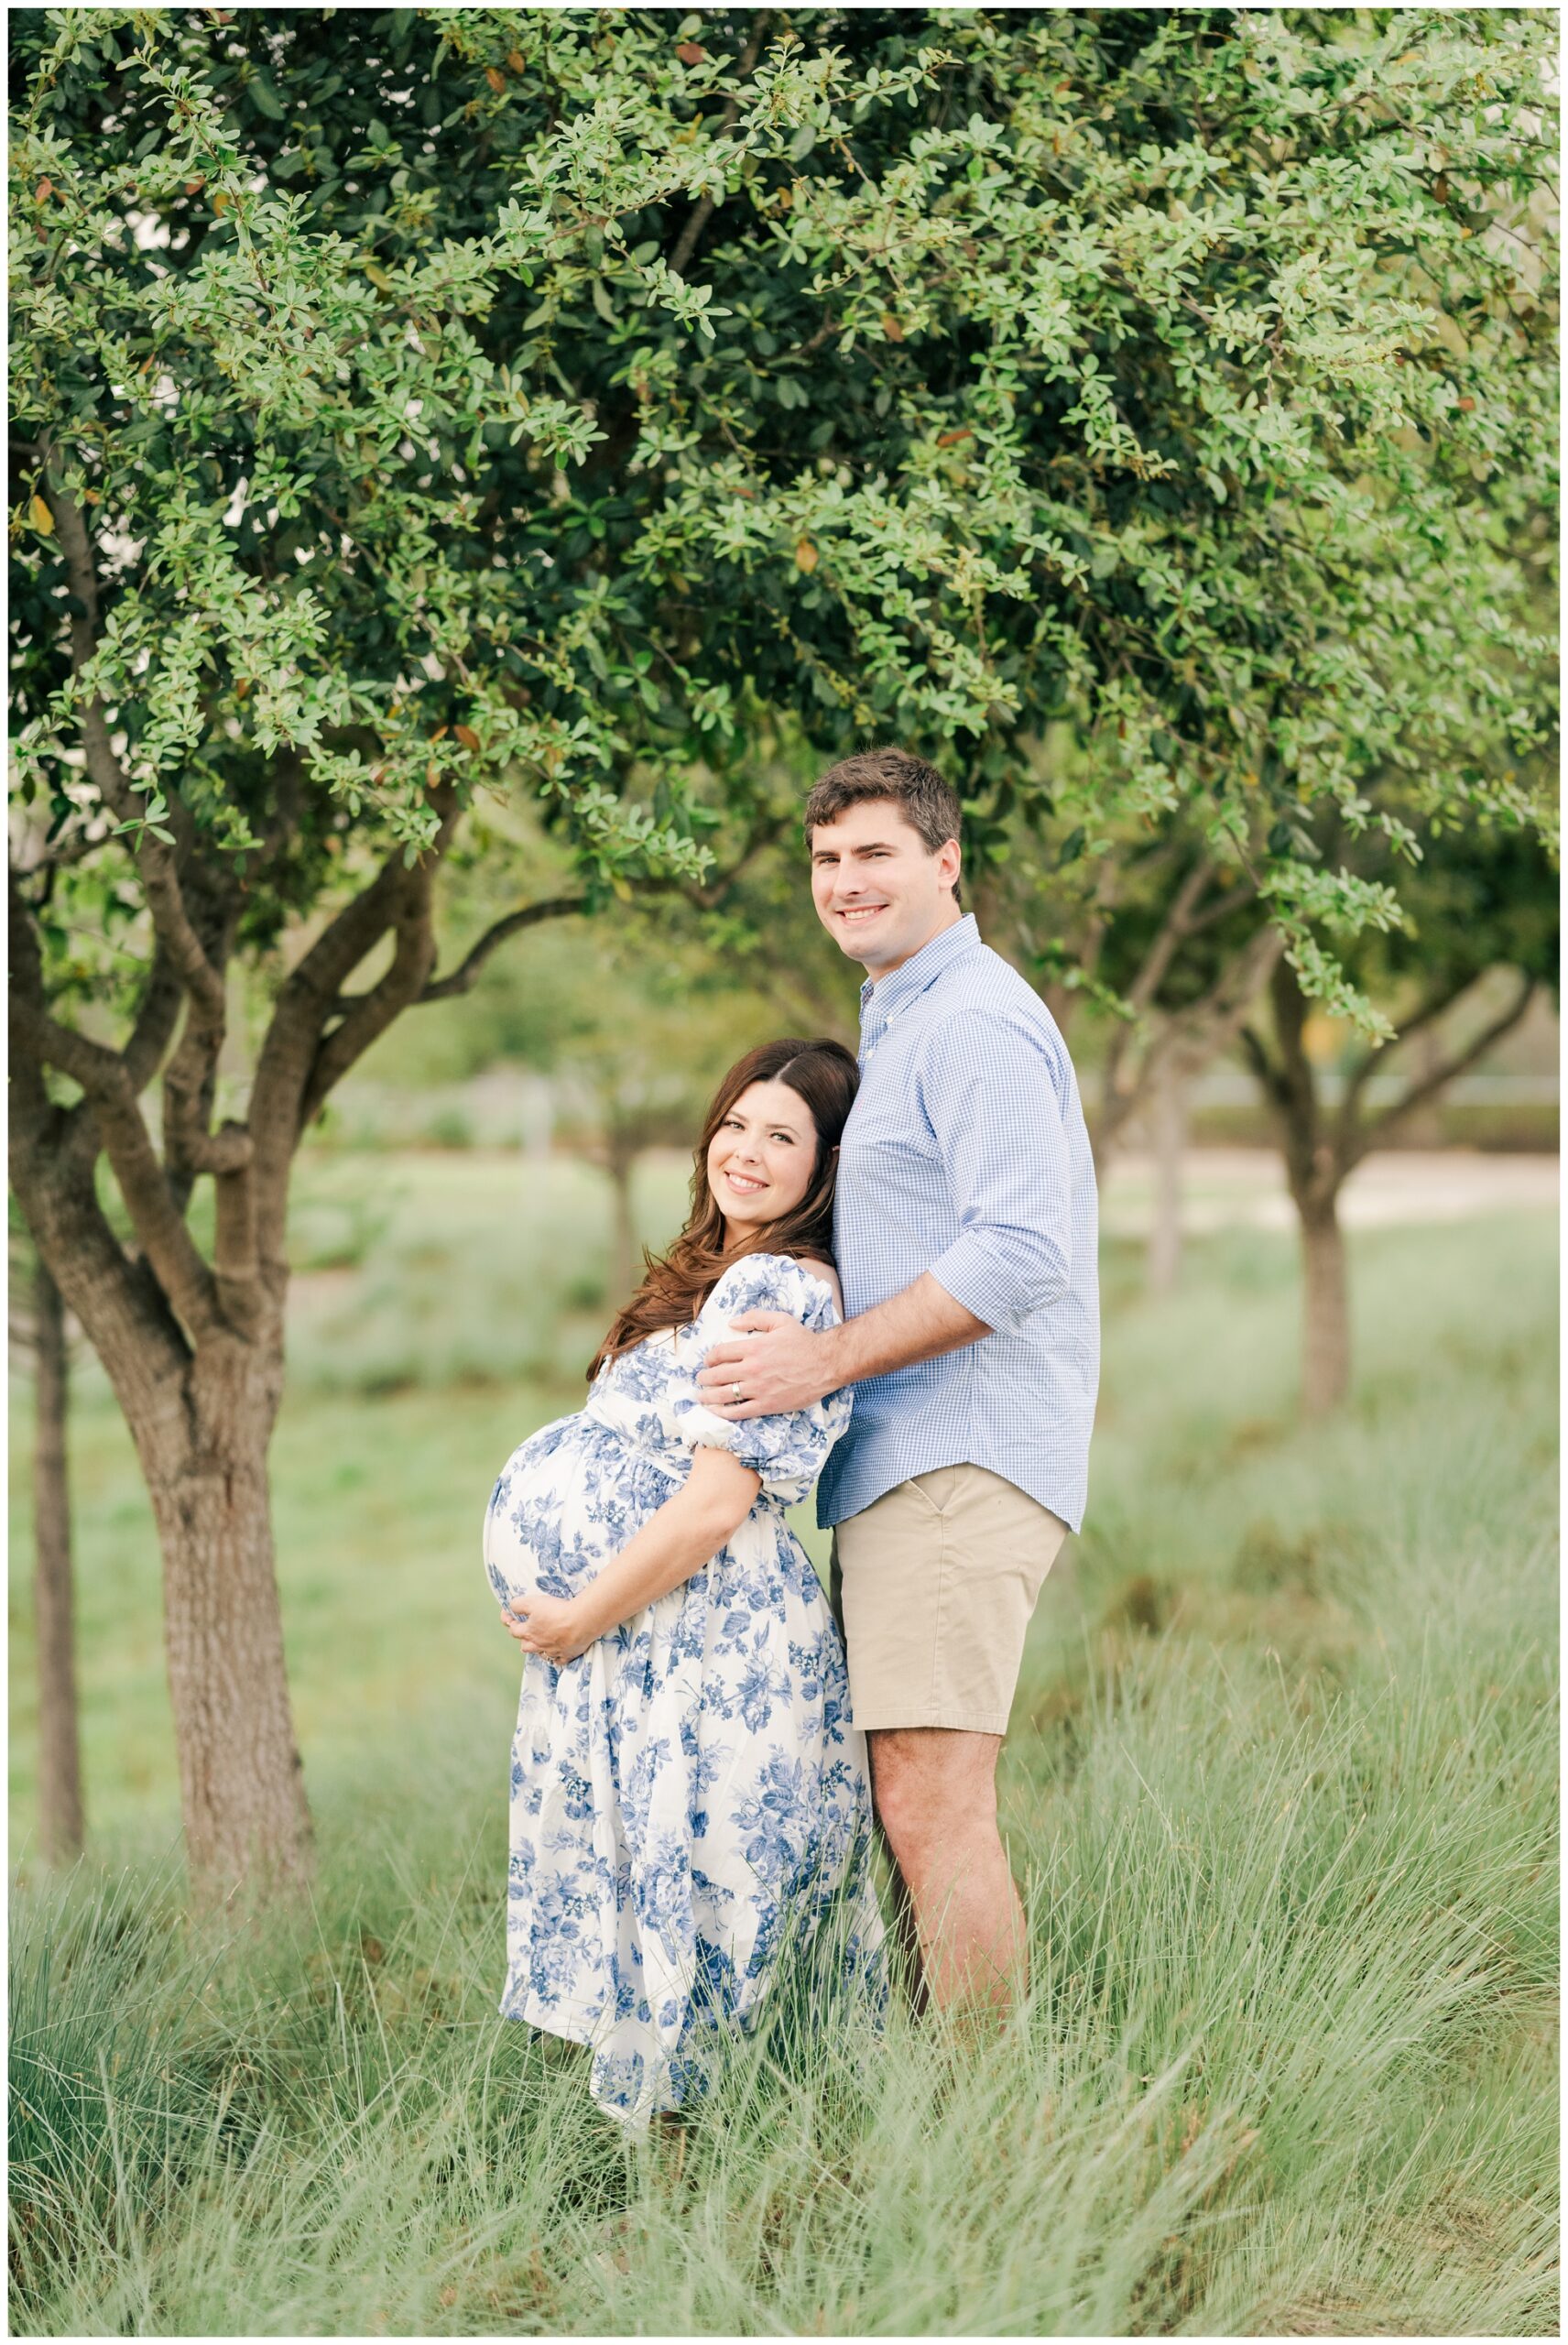 Maternity Photography session in The Woodlands with mom and dad.